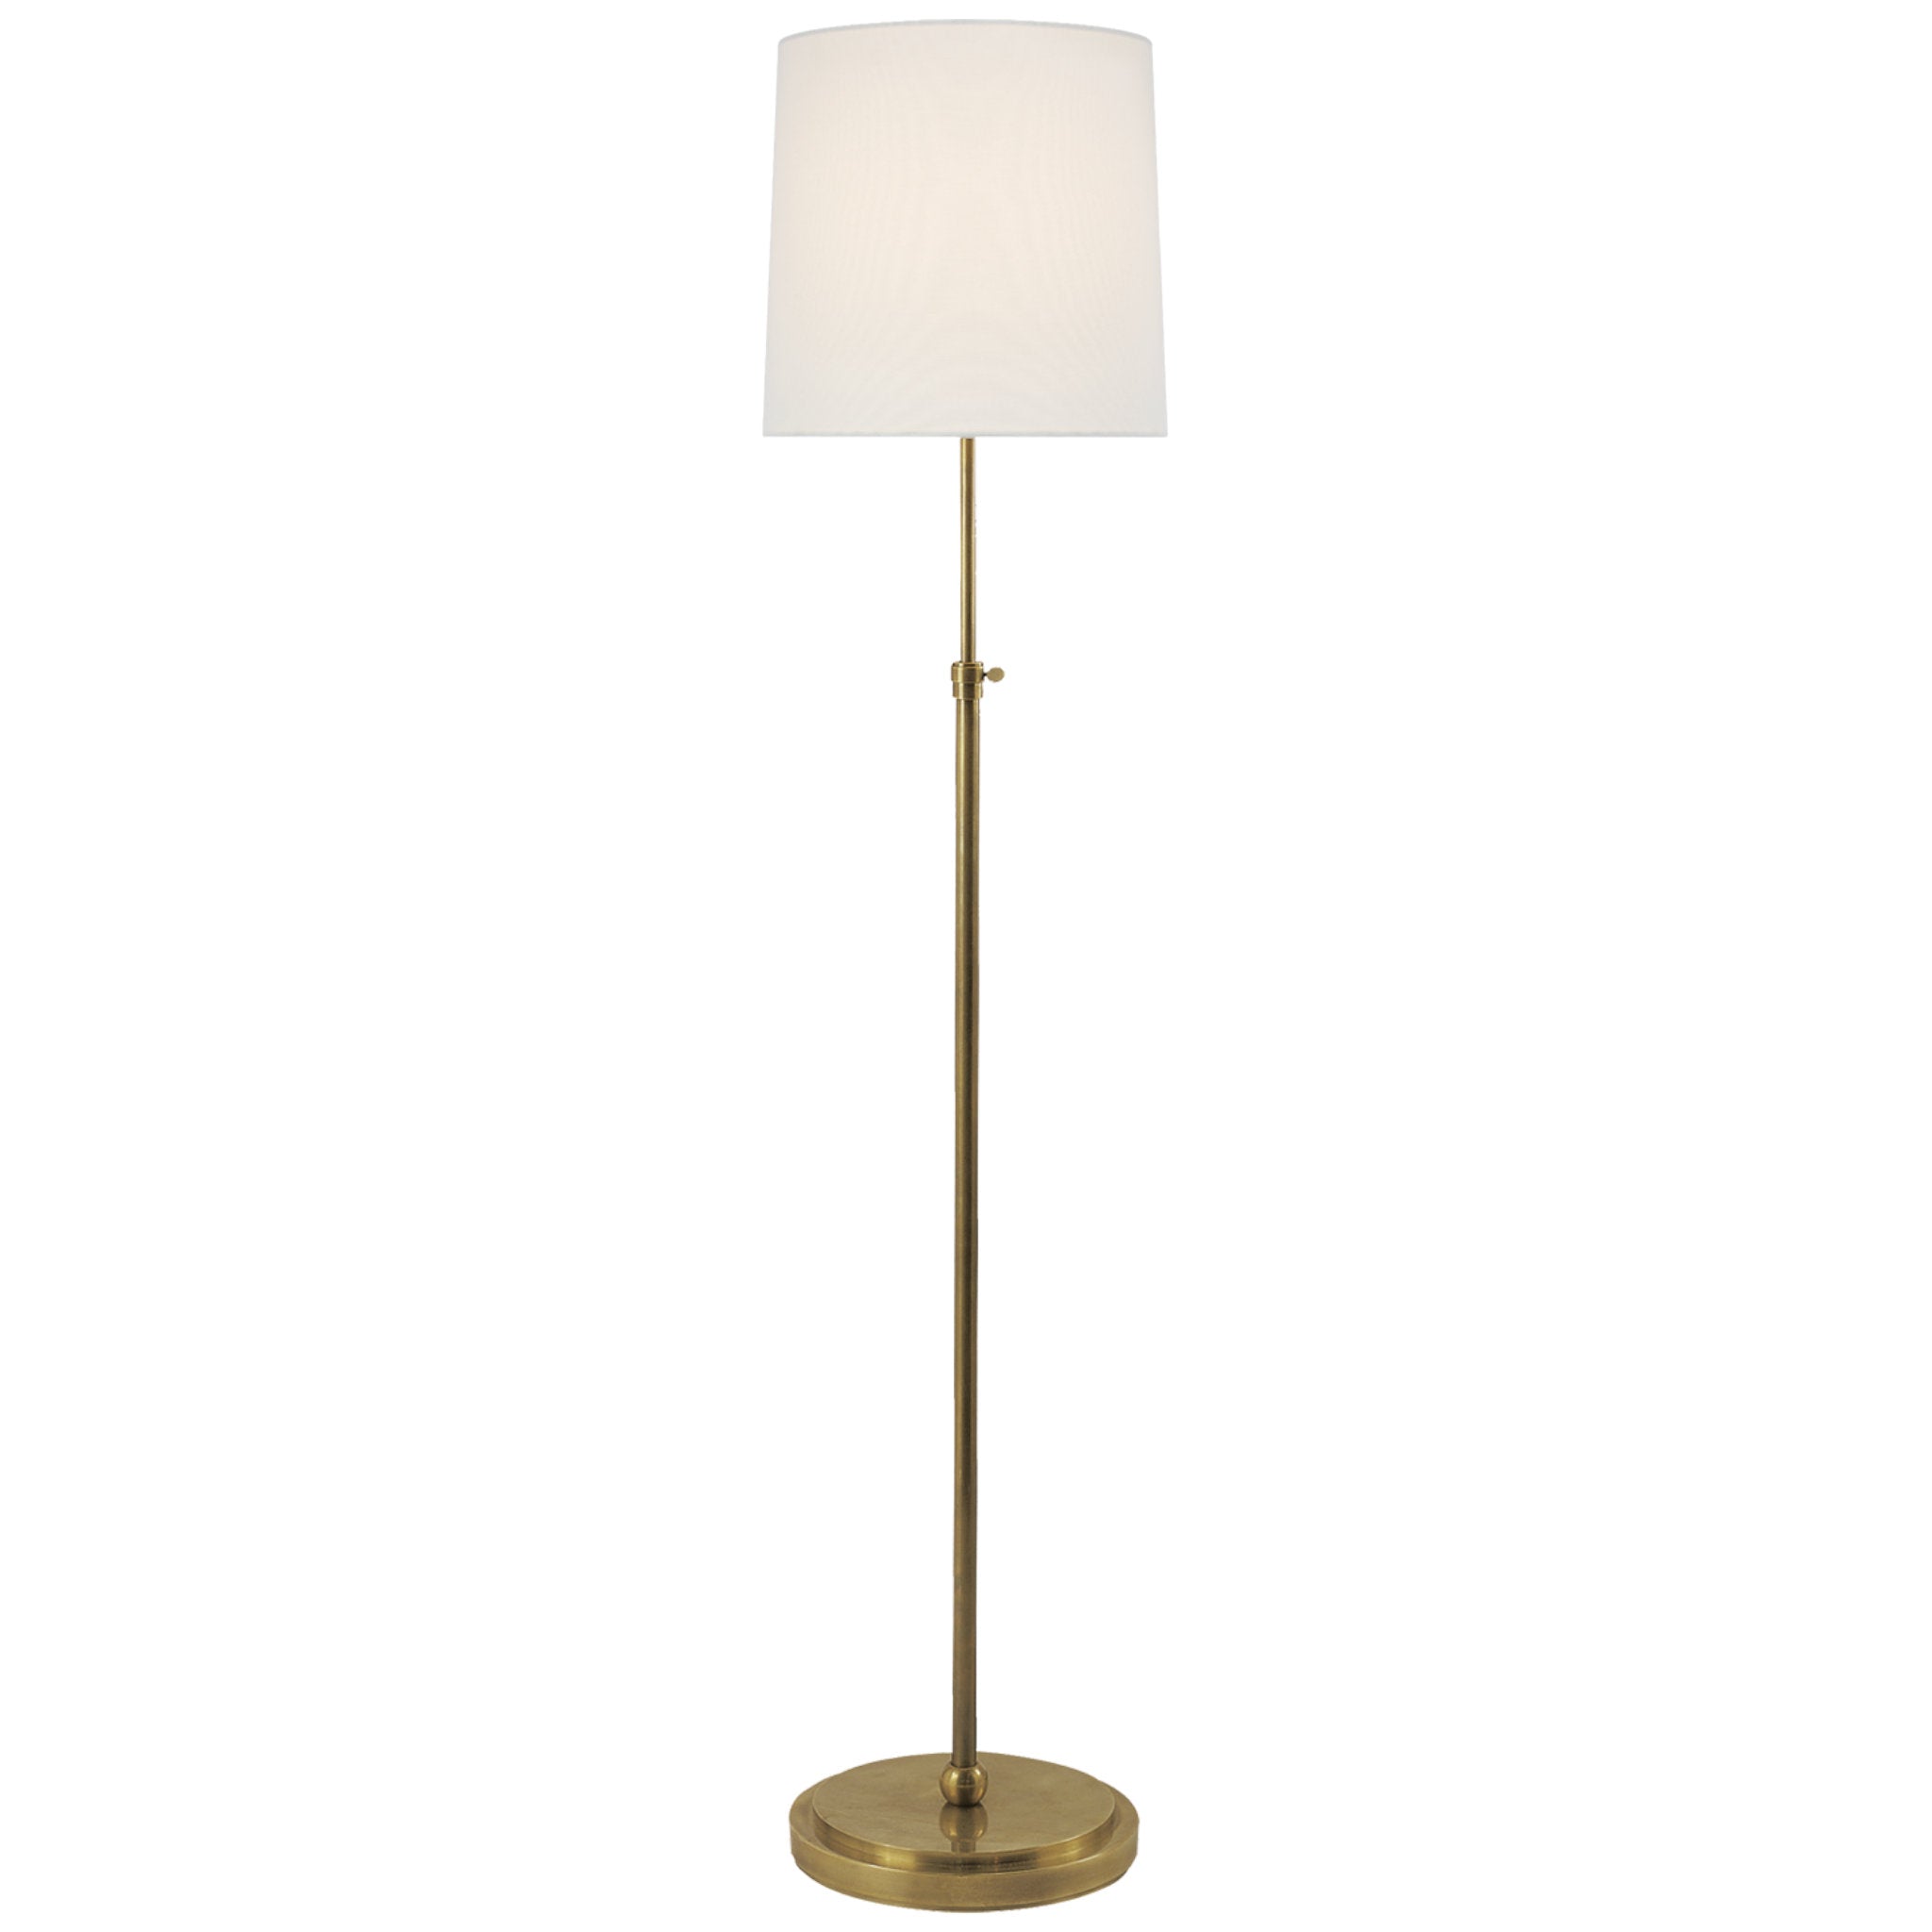 Thomas O'Brien Bryant Floor Lamp in Hand-Rubbed Antique Brass with Linen Shade